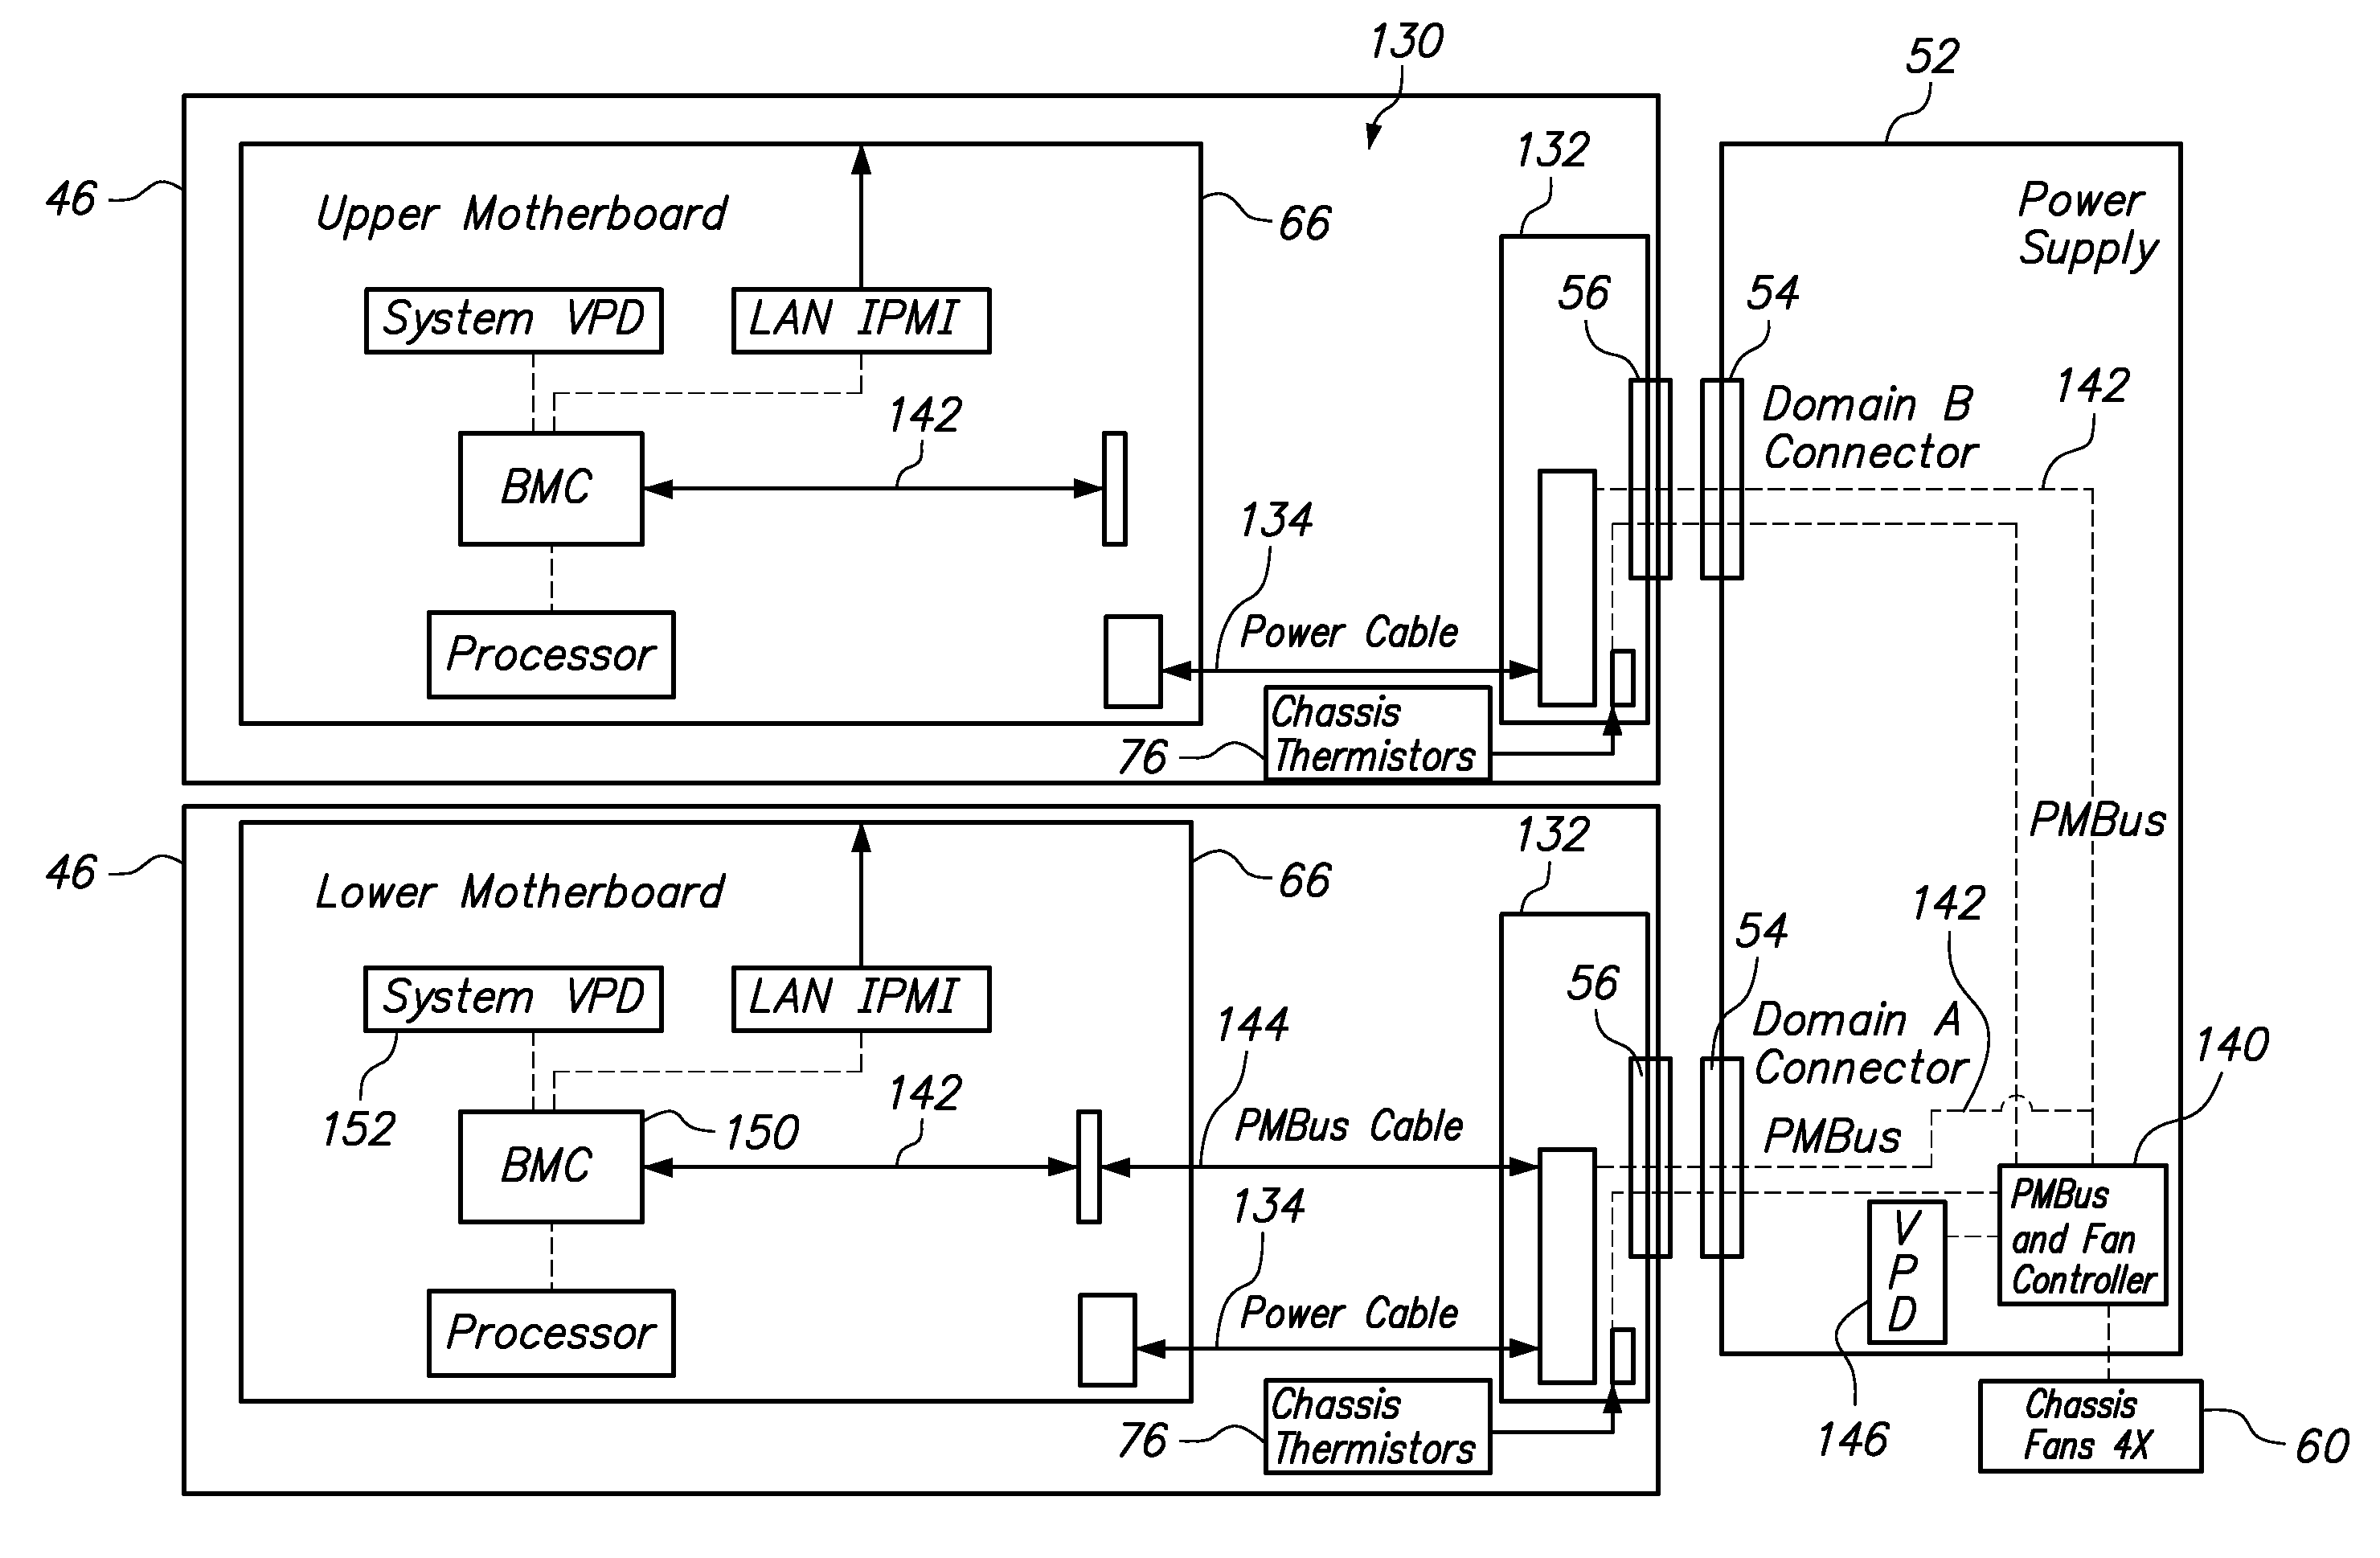 System Power Capping Using Information Received From The Installed Power Supply